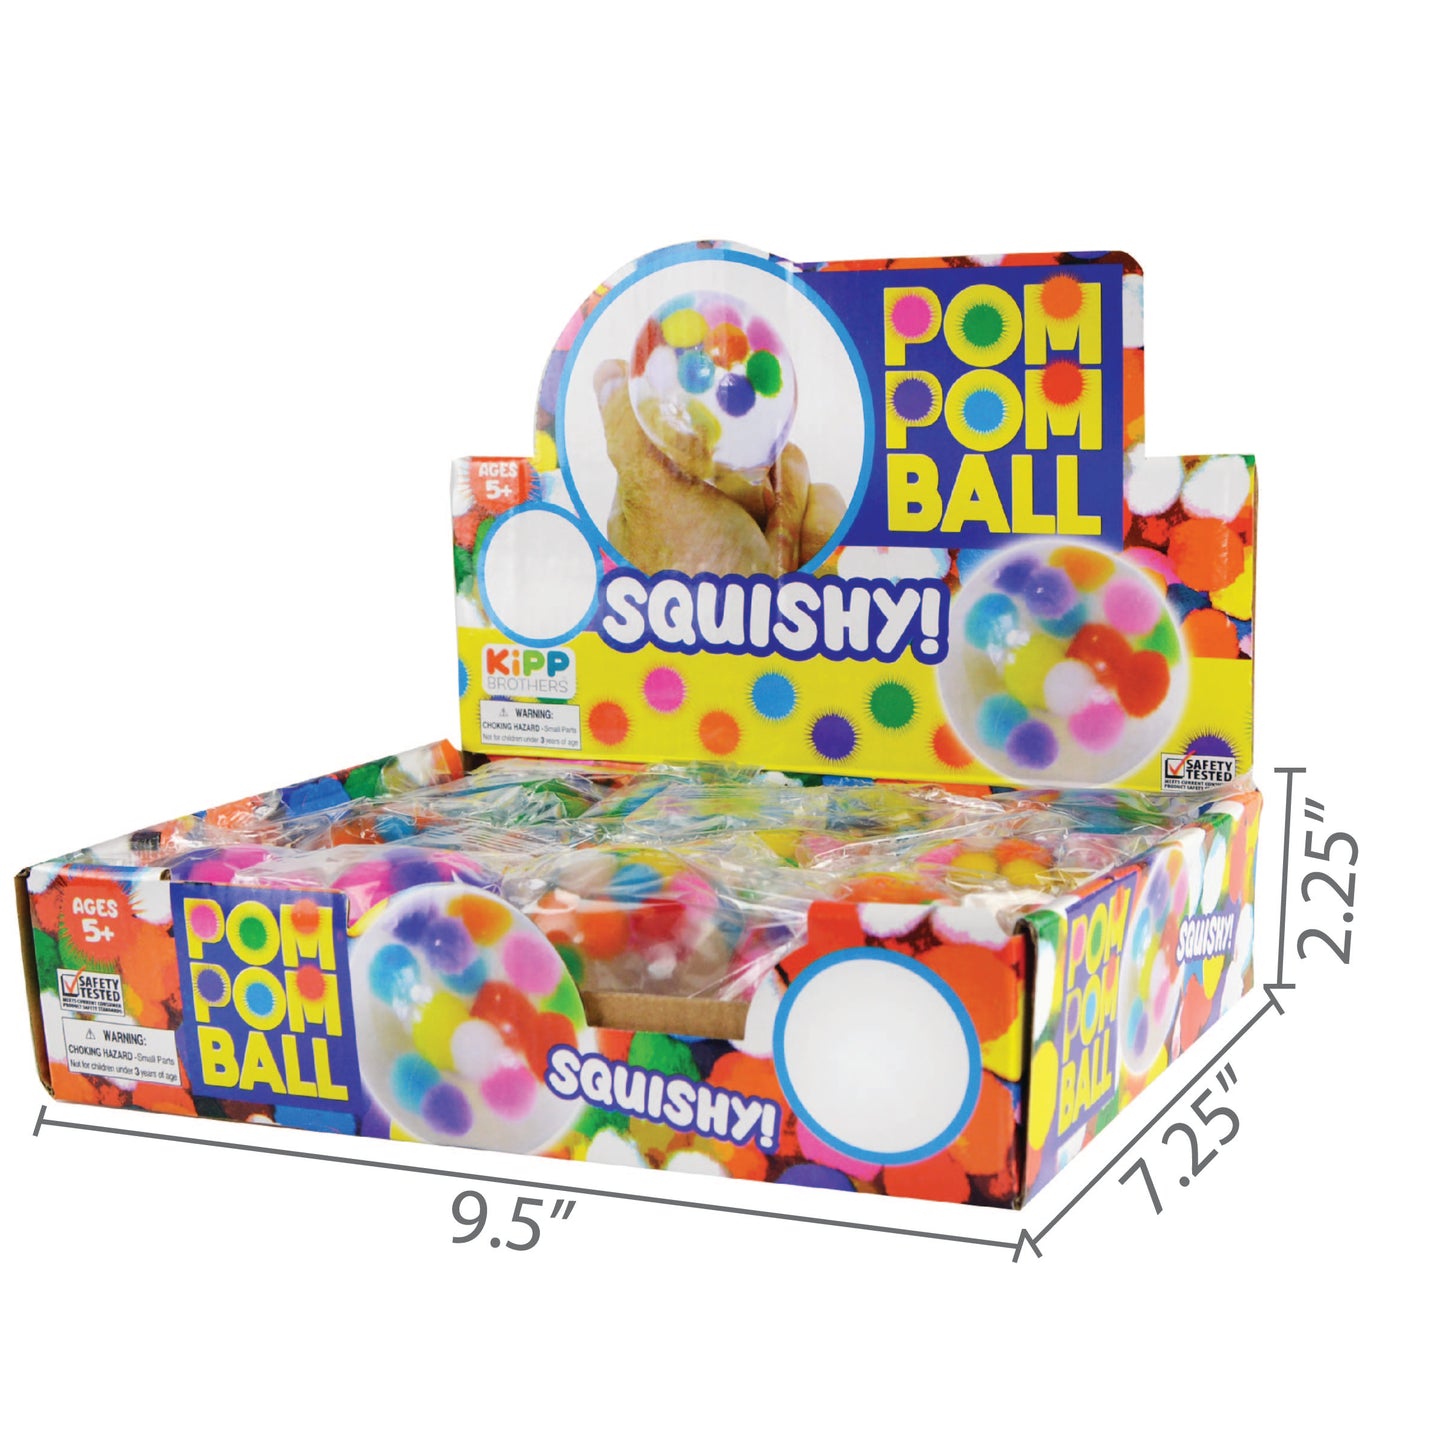 ITEM NUMBER 022054 POM POM WATER BALL 12 PIECES PER DISPLAY